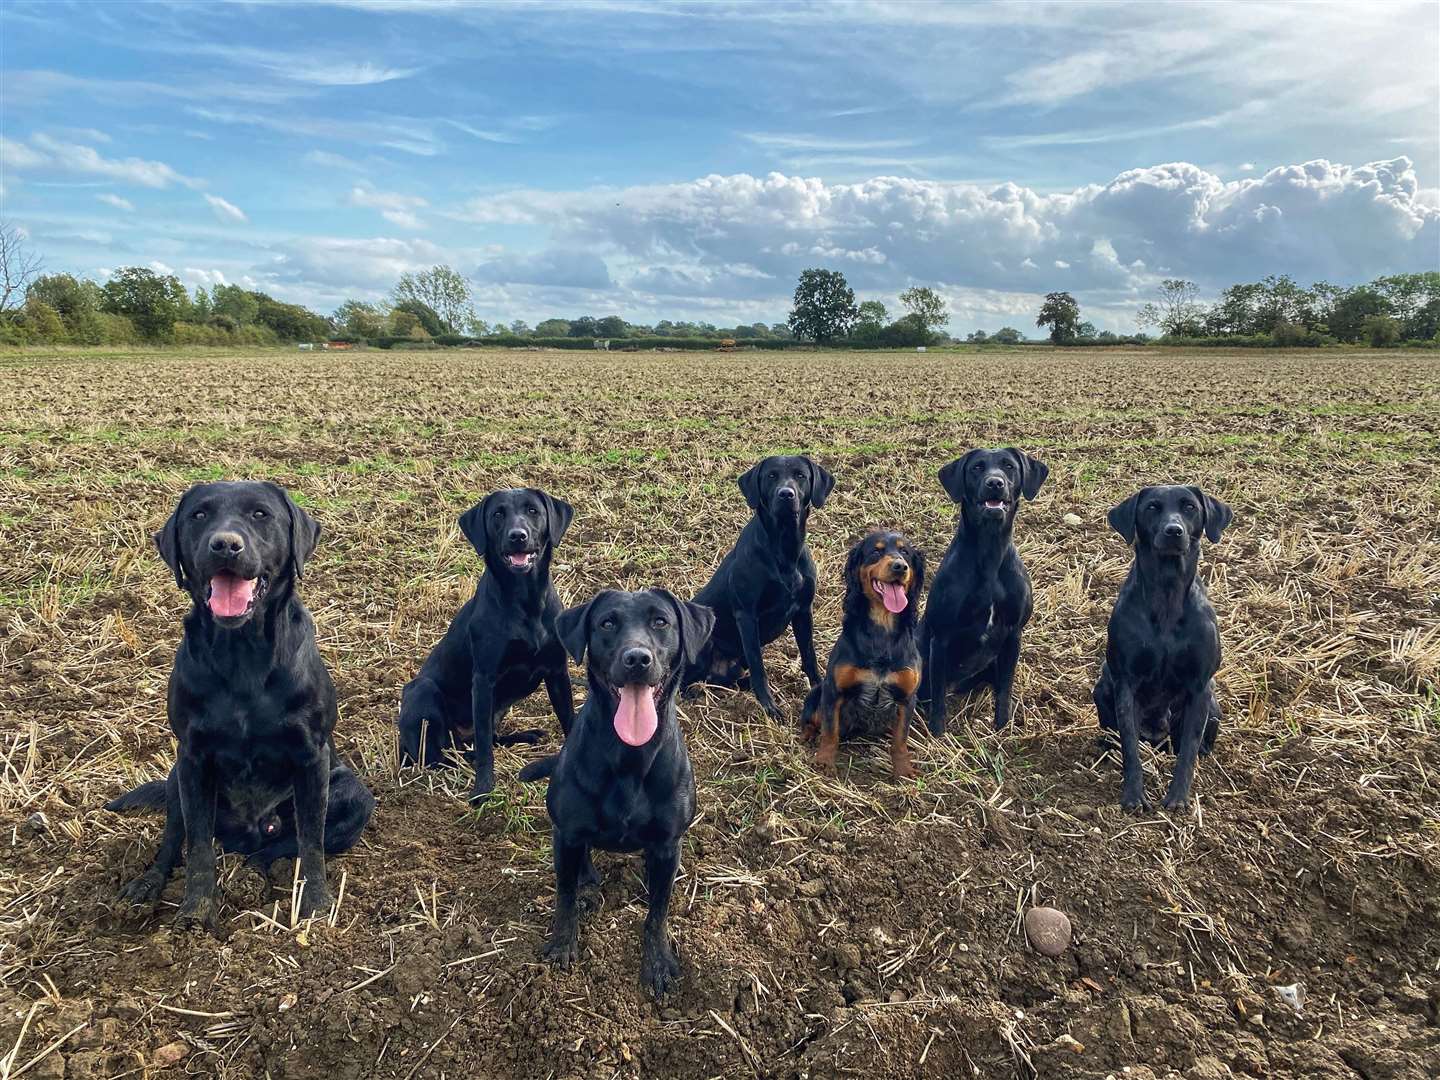 Skinner's believe working dogs are so much more than sheepdogs and sniffer dogs. Picture: Tideflow Gundogs